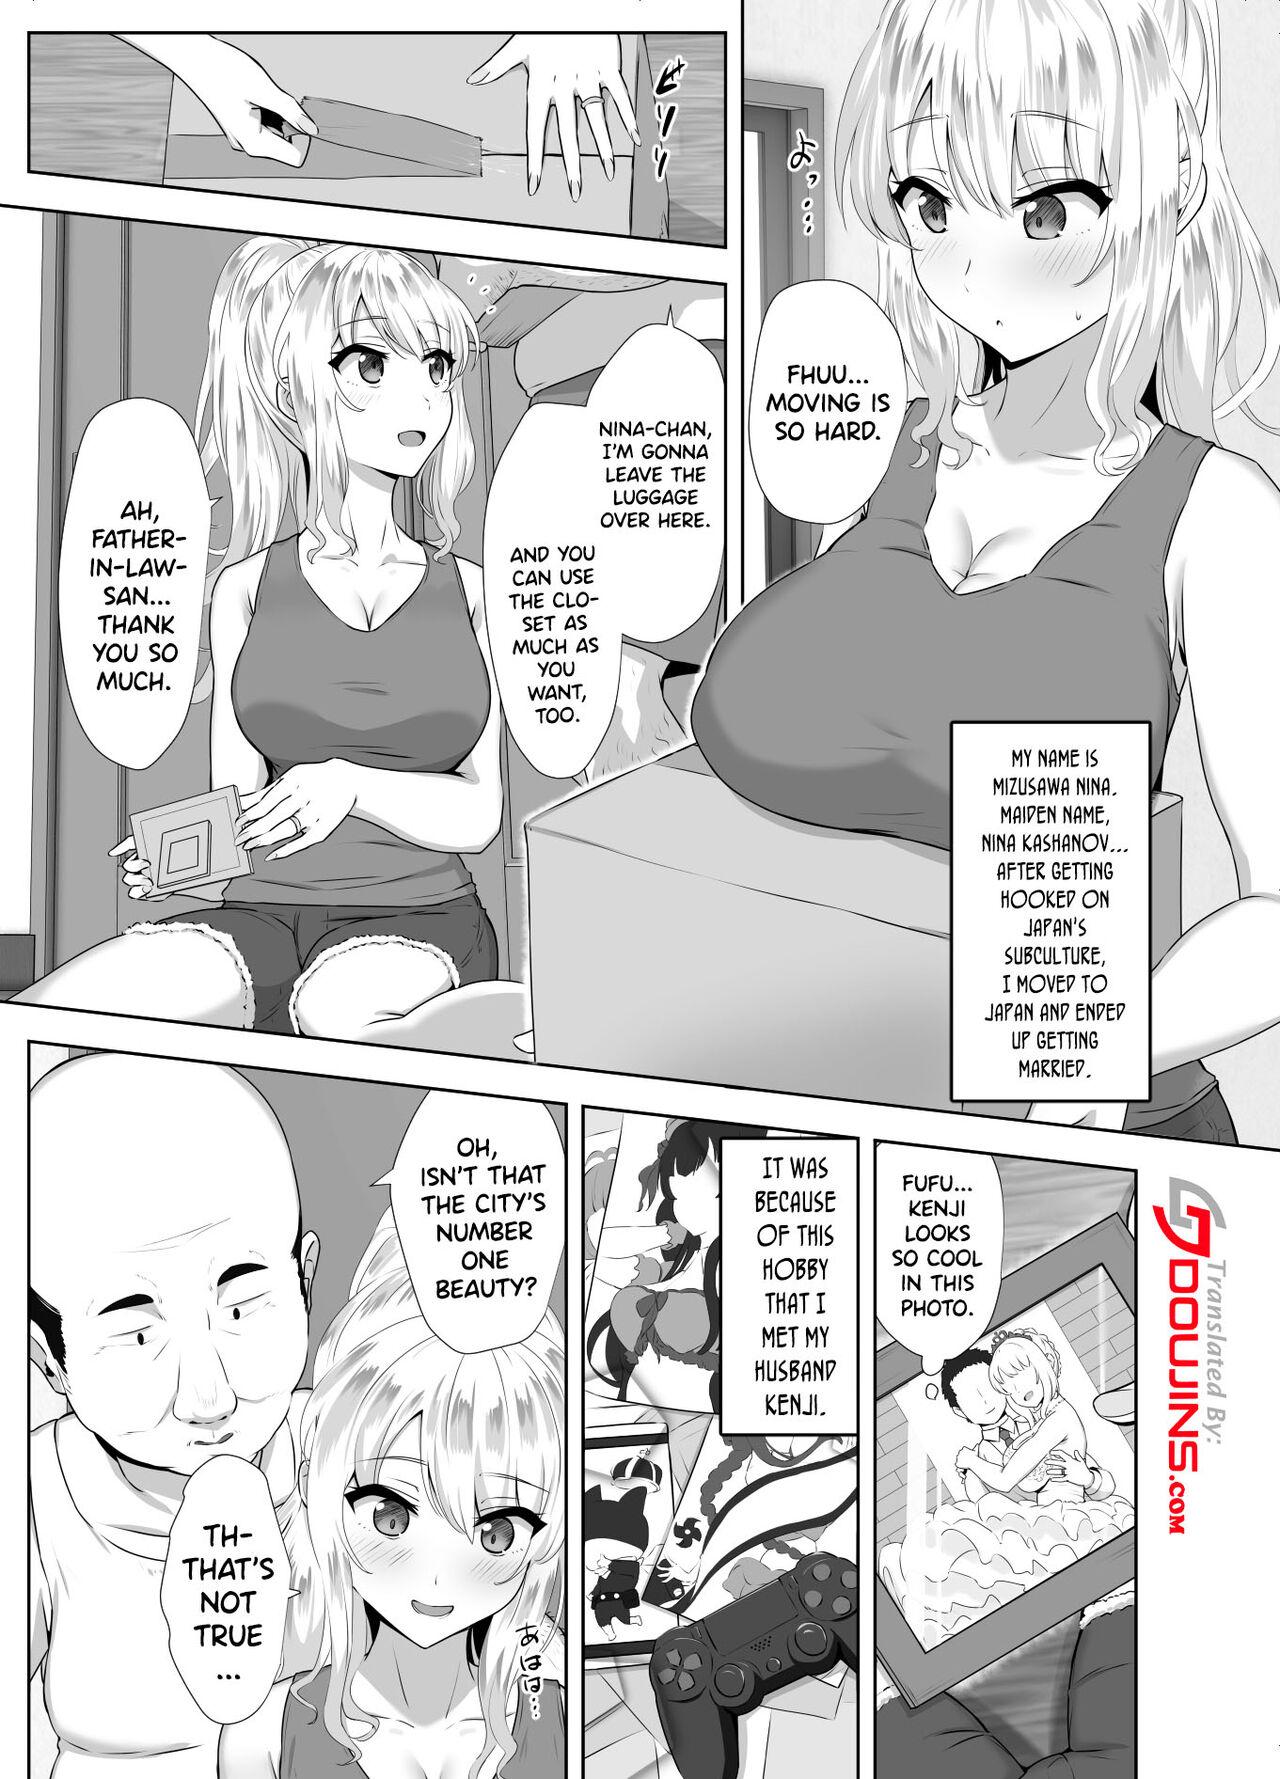 Play Russia-jin ga Osake de Nihonjin ni Makeru Wakenai Deshou? | There's No Way a Russian Could Lose to a Japanese Person In Drinking, Right? - Original Shaved Pussy - Picture 2